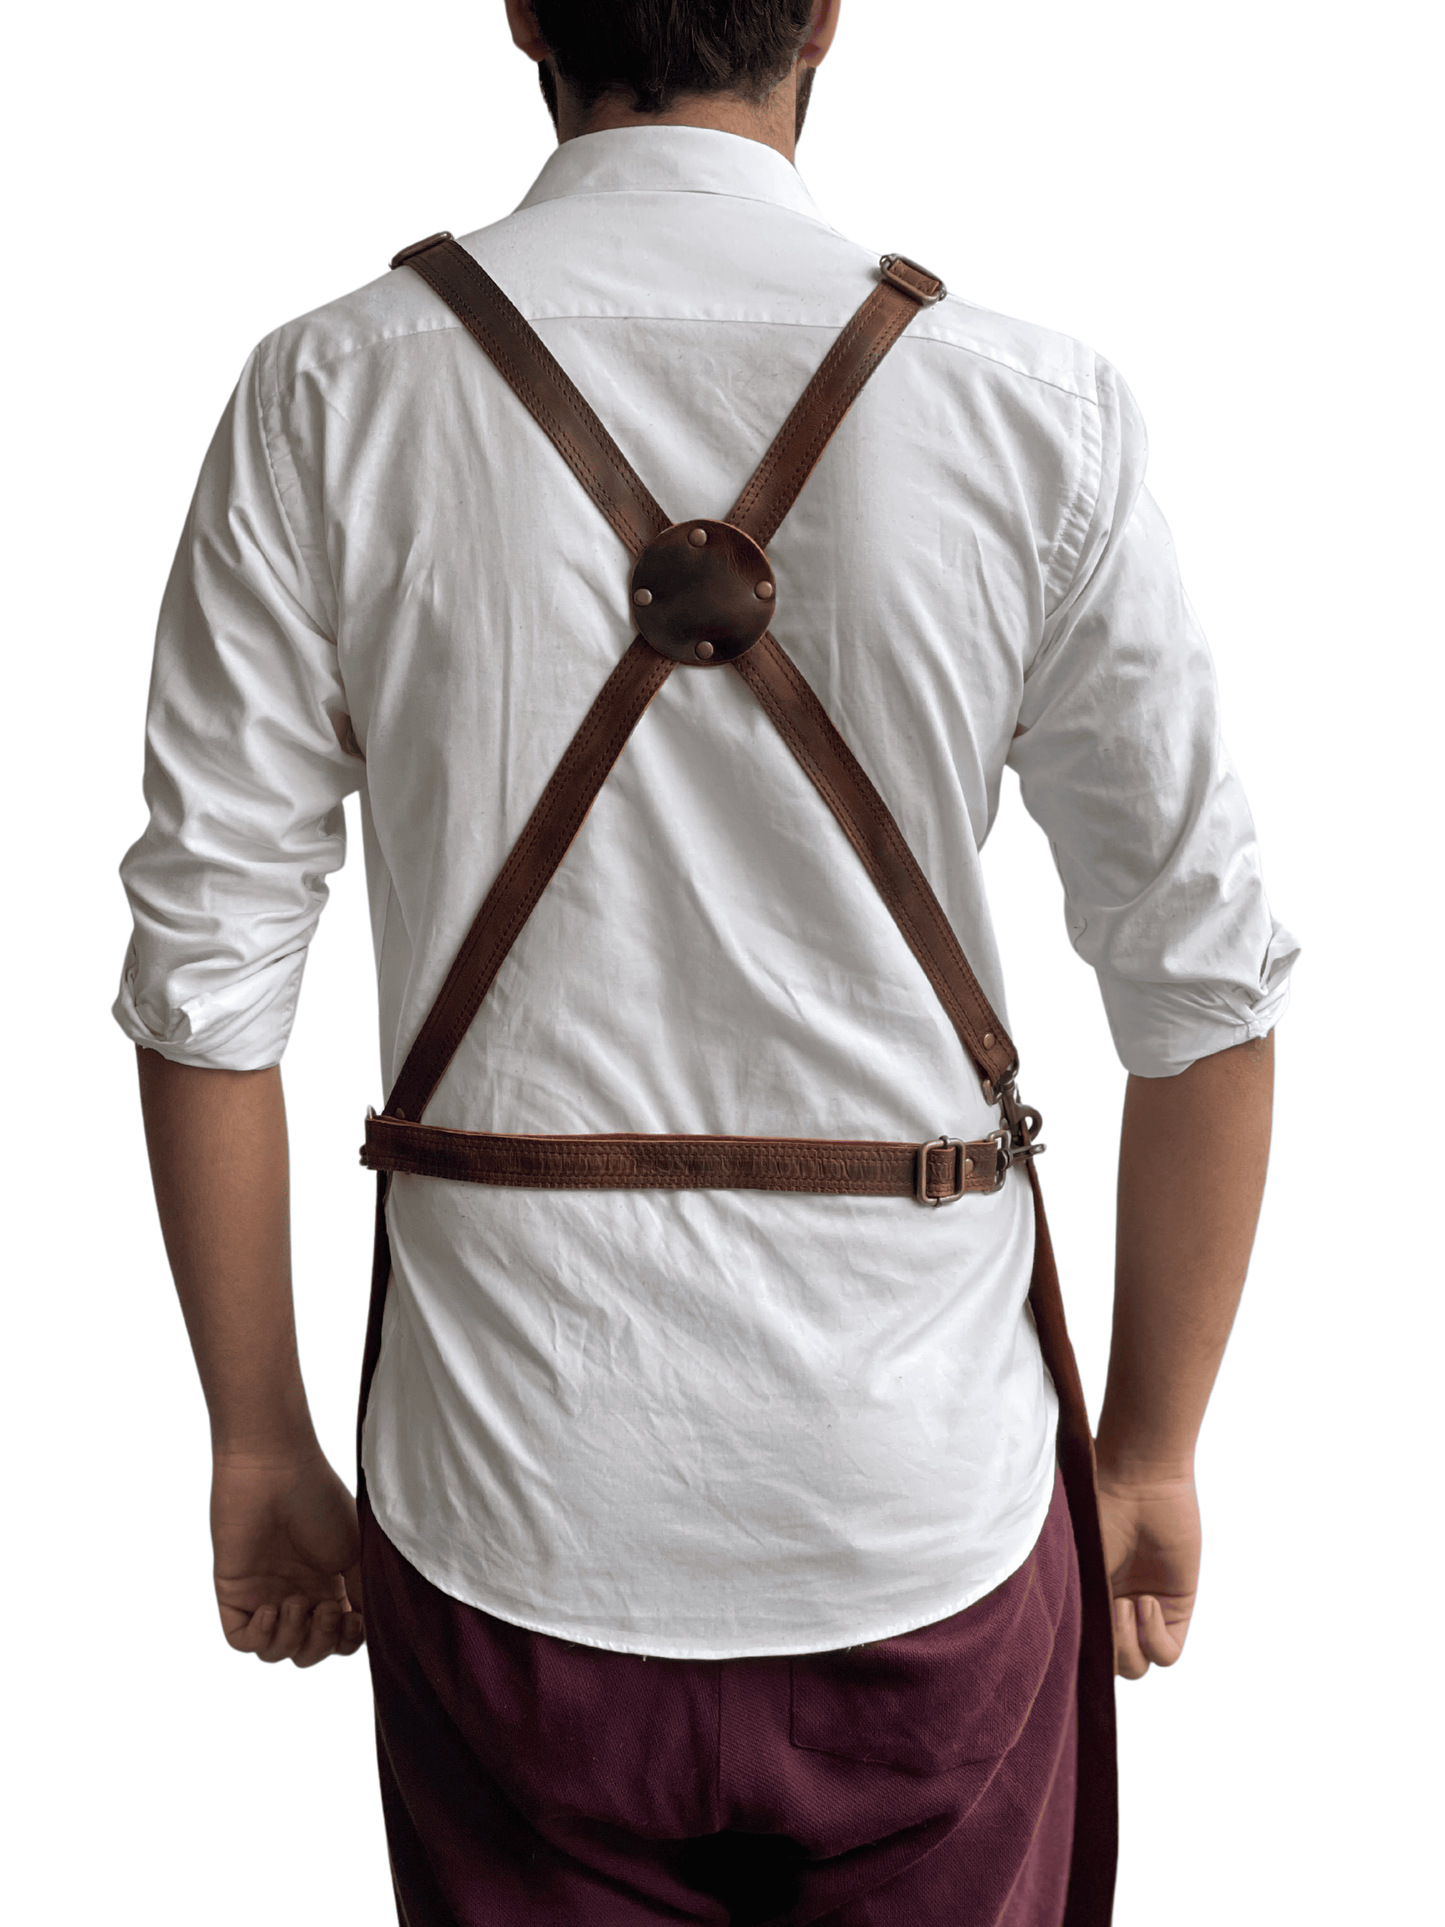 Leather Apron for Welding with 12 Tool Pockets Heat & Flame Resistant Heavy Duty Tool Apron